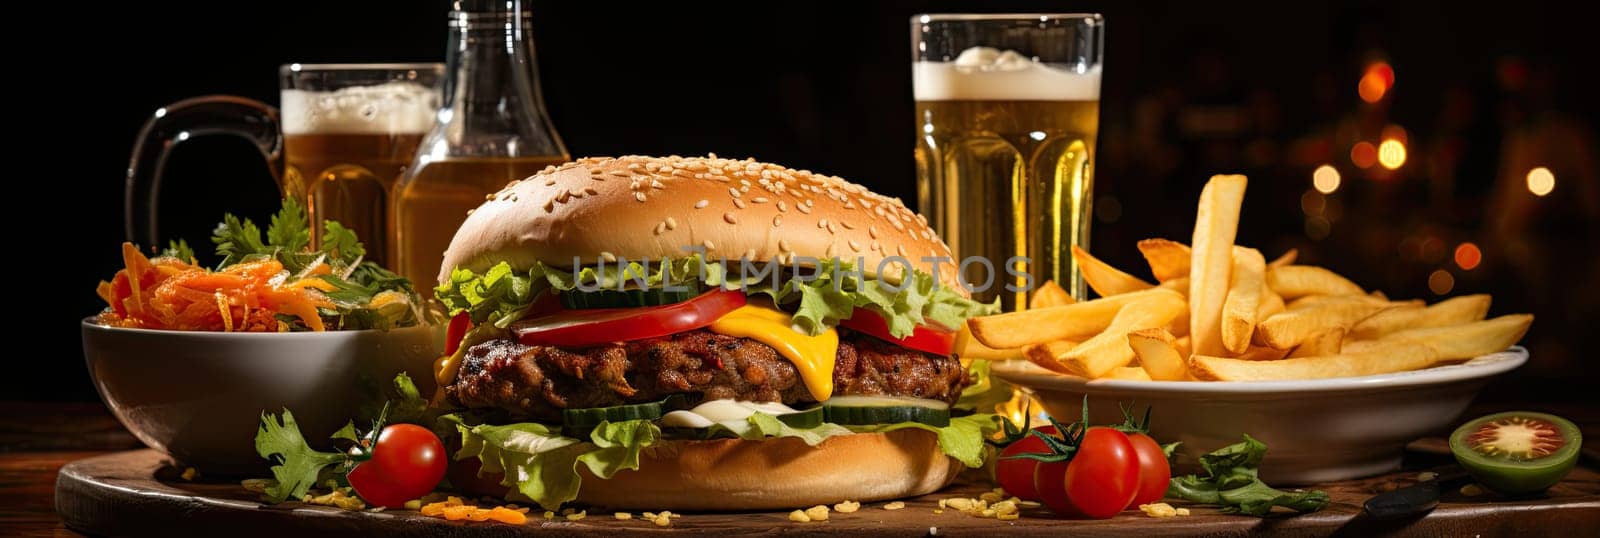 Tasty hamburger, fast food set on plate. burger, potato chips, french fries, fried cheese and more on table, AI by AnatoliiFoto